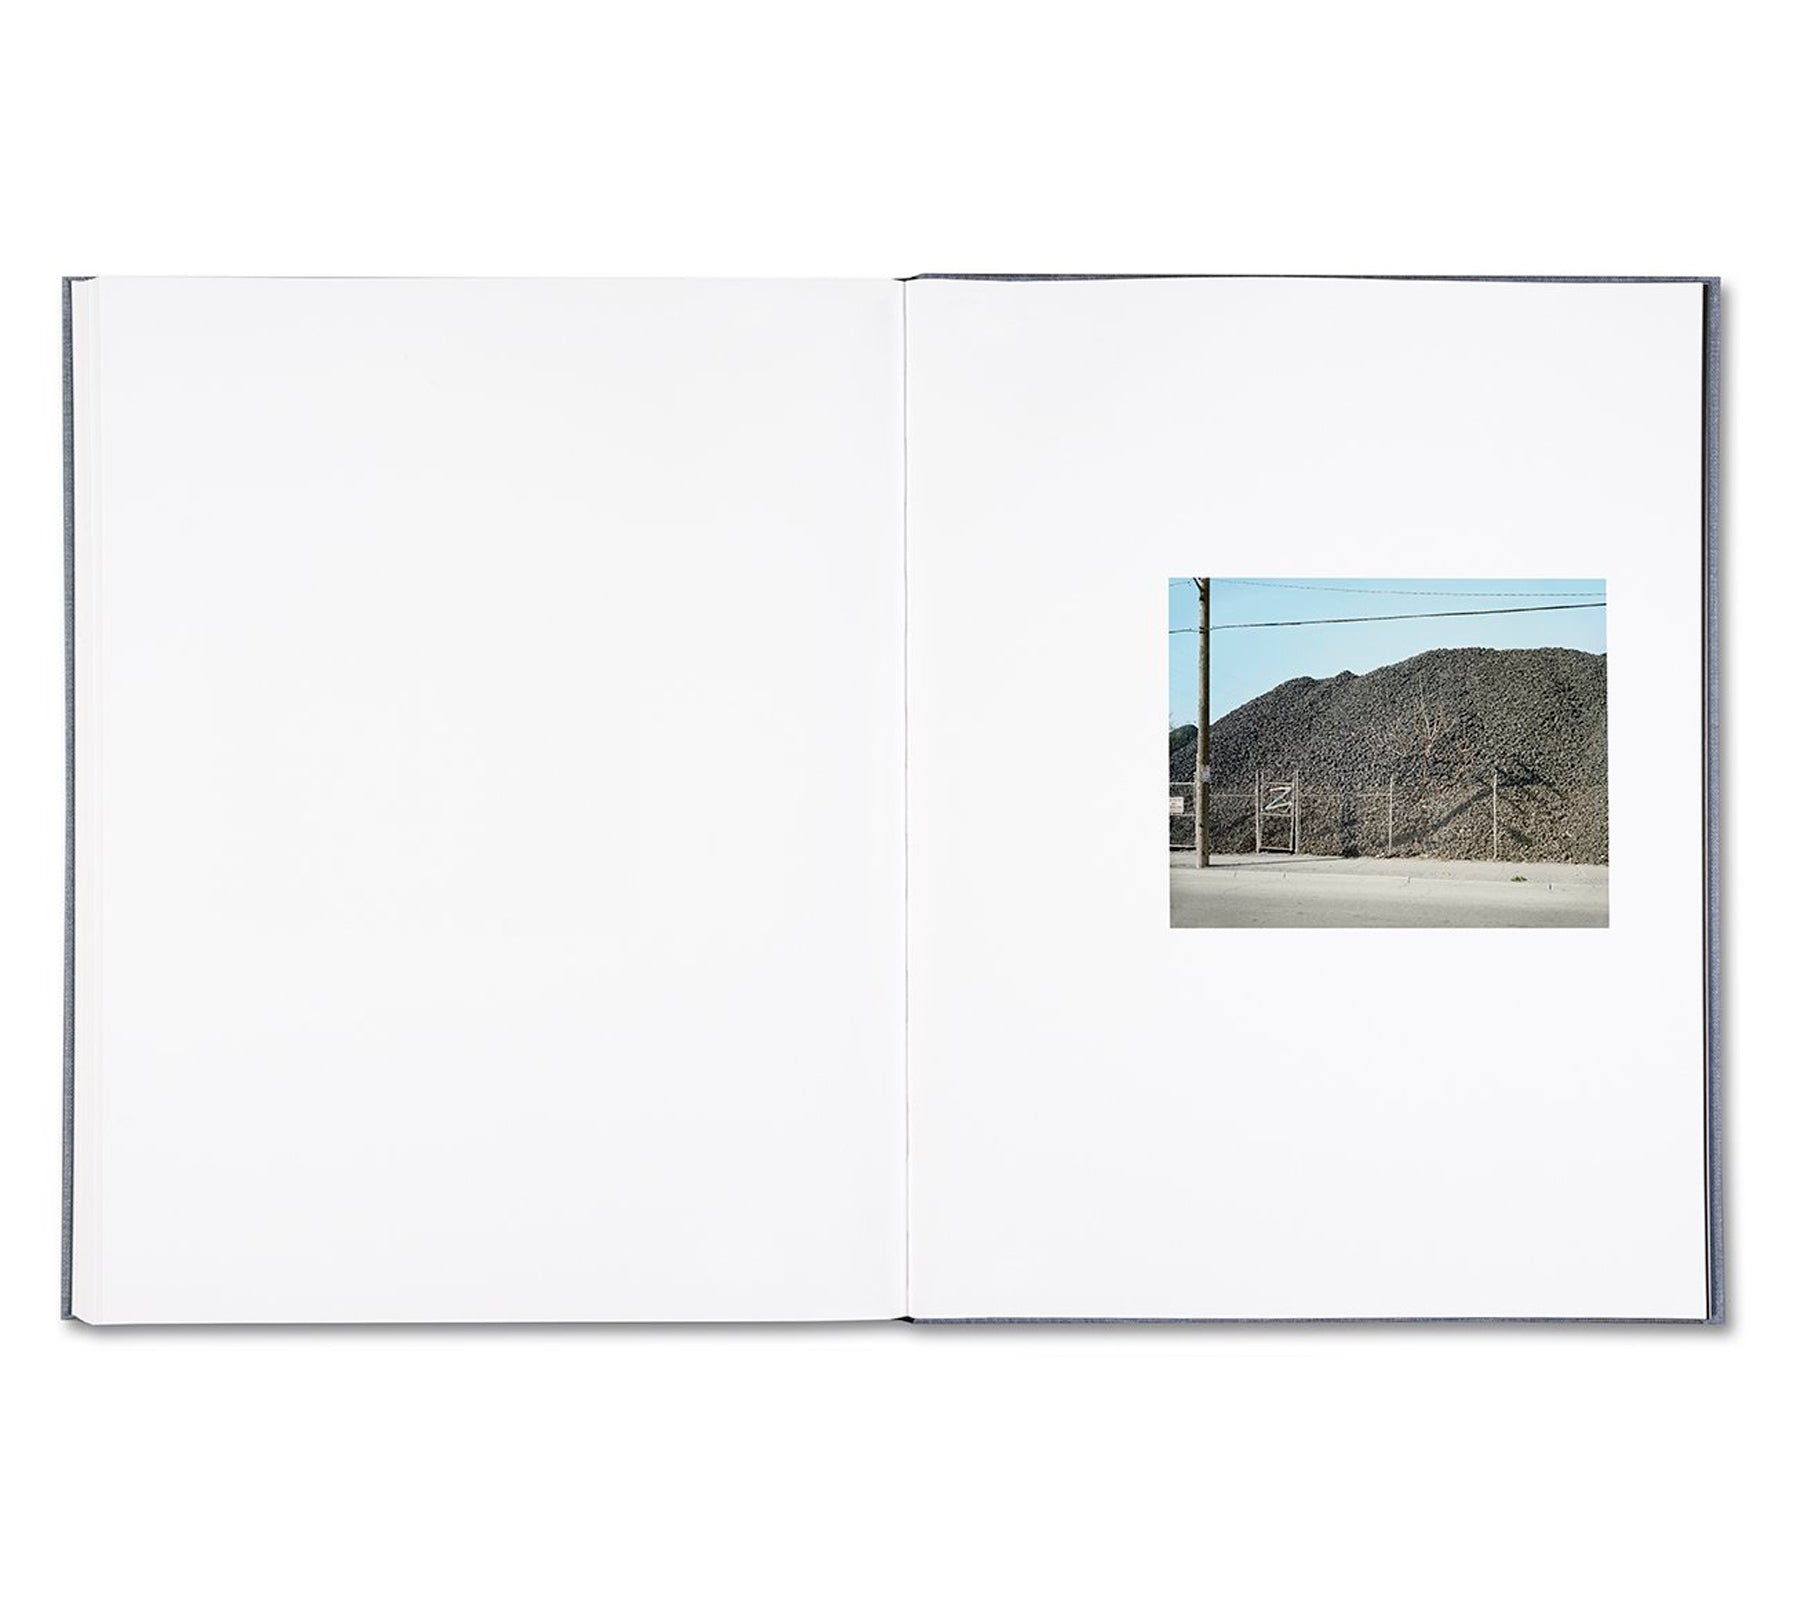 STEEL TOWN by Stephen Shore [SIGNED]